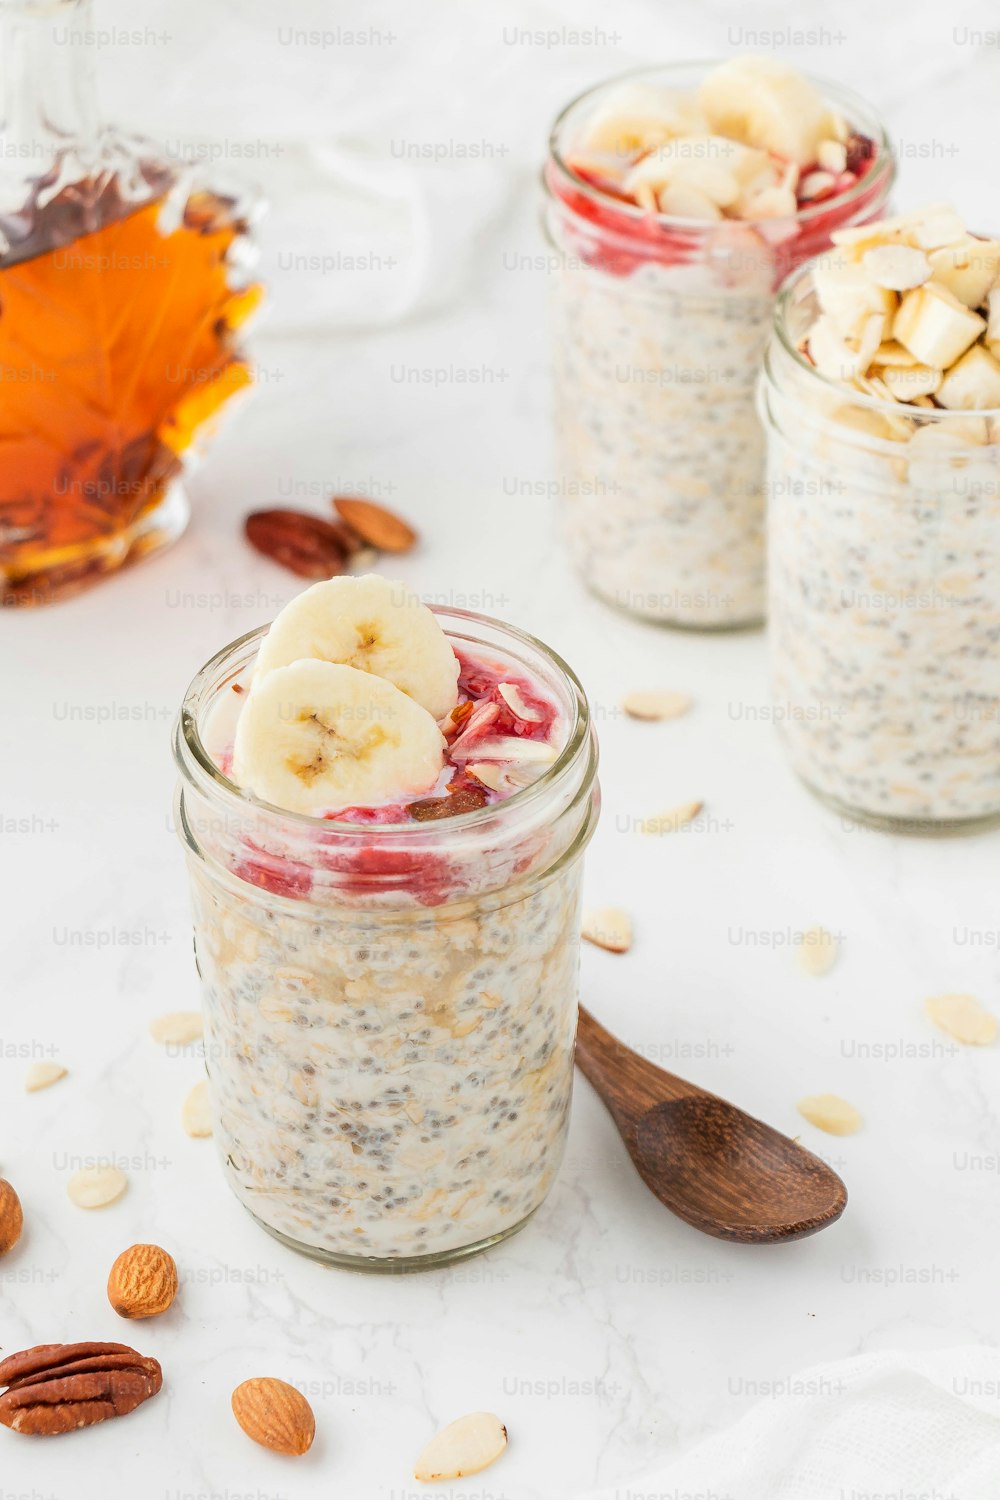 two jars of oatmeal with bananas and almonds